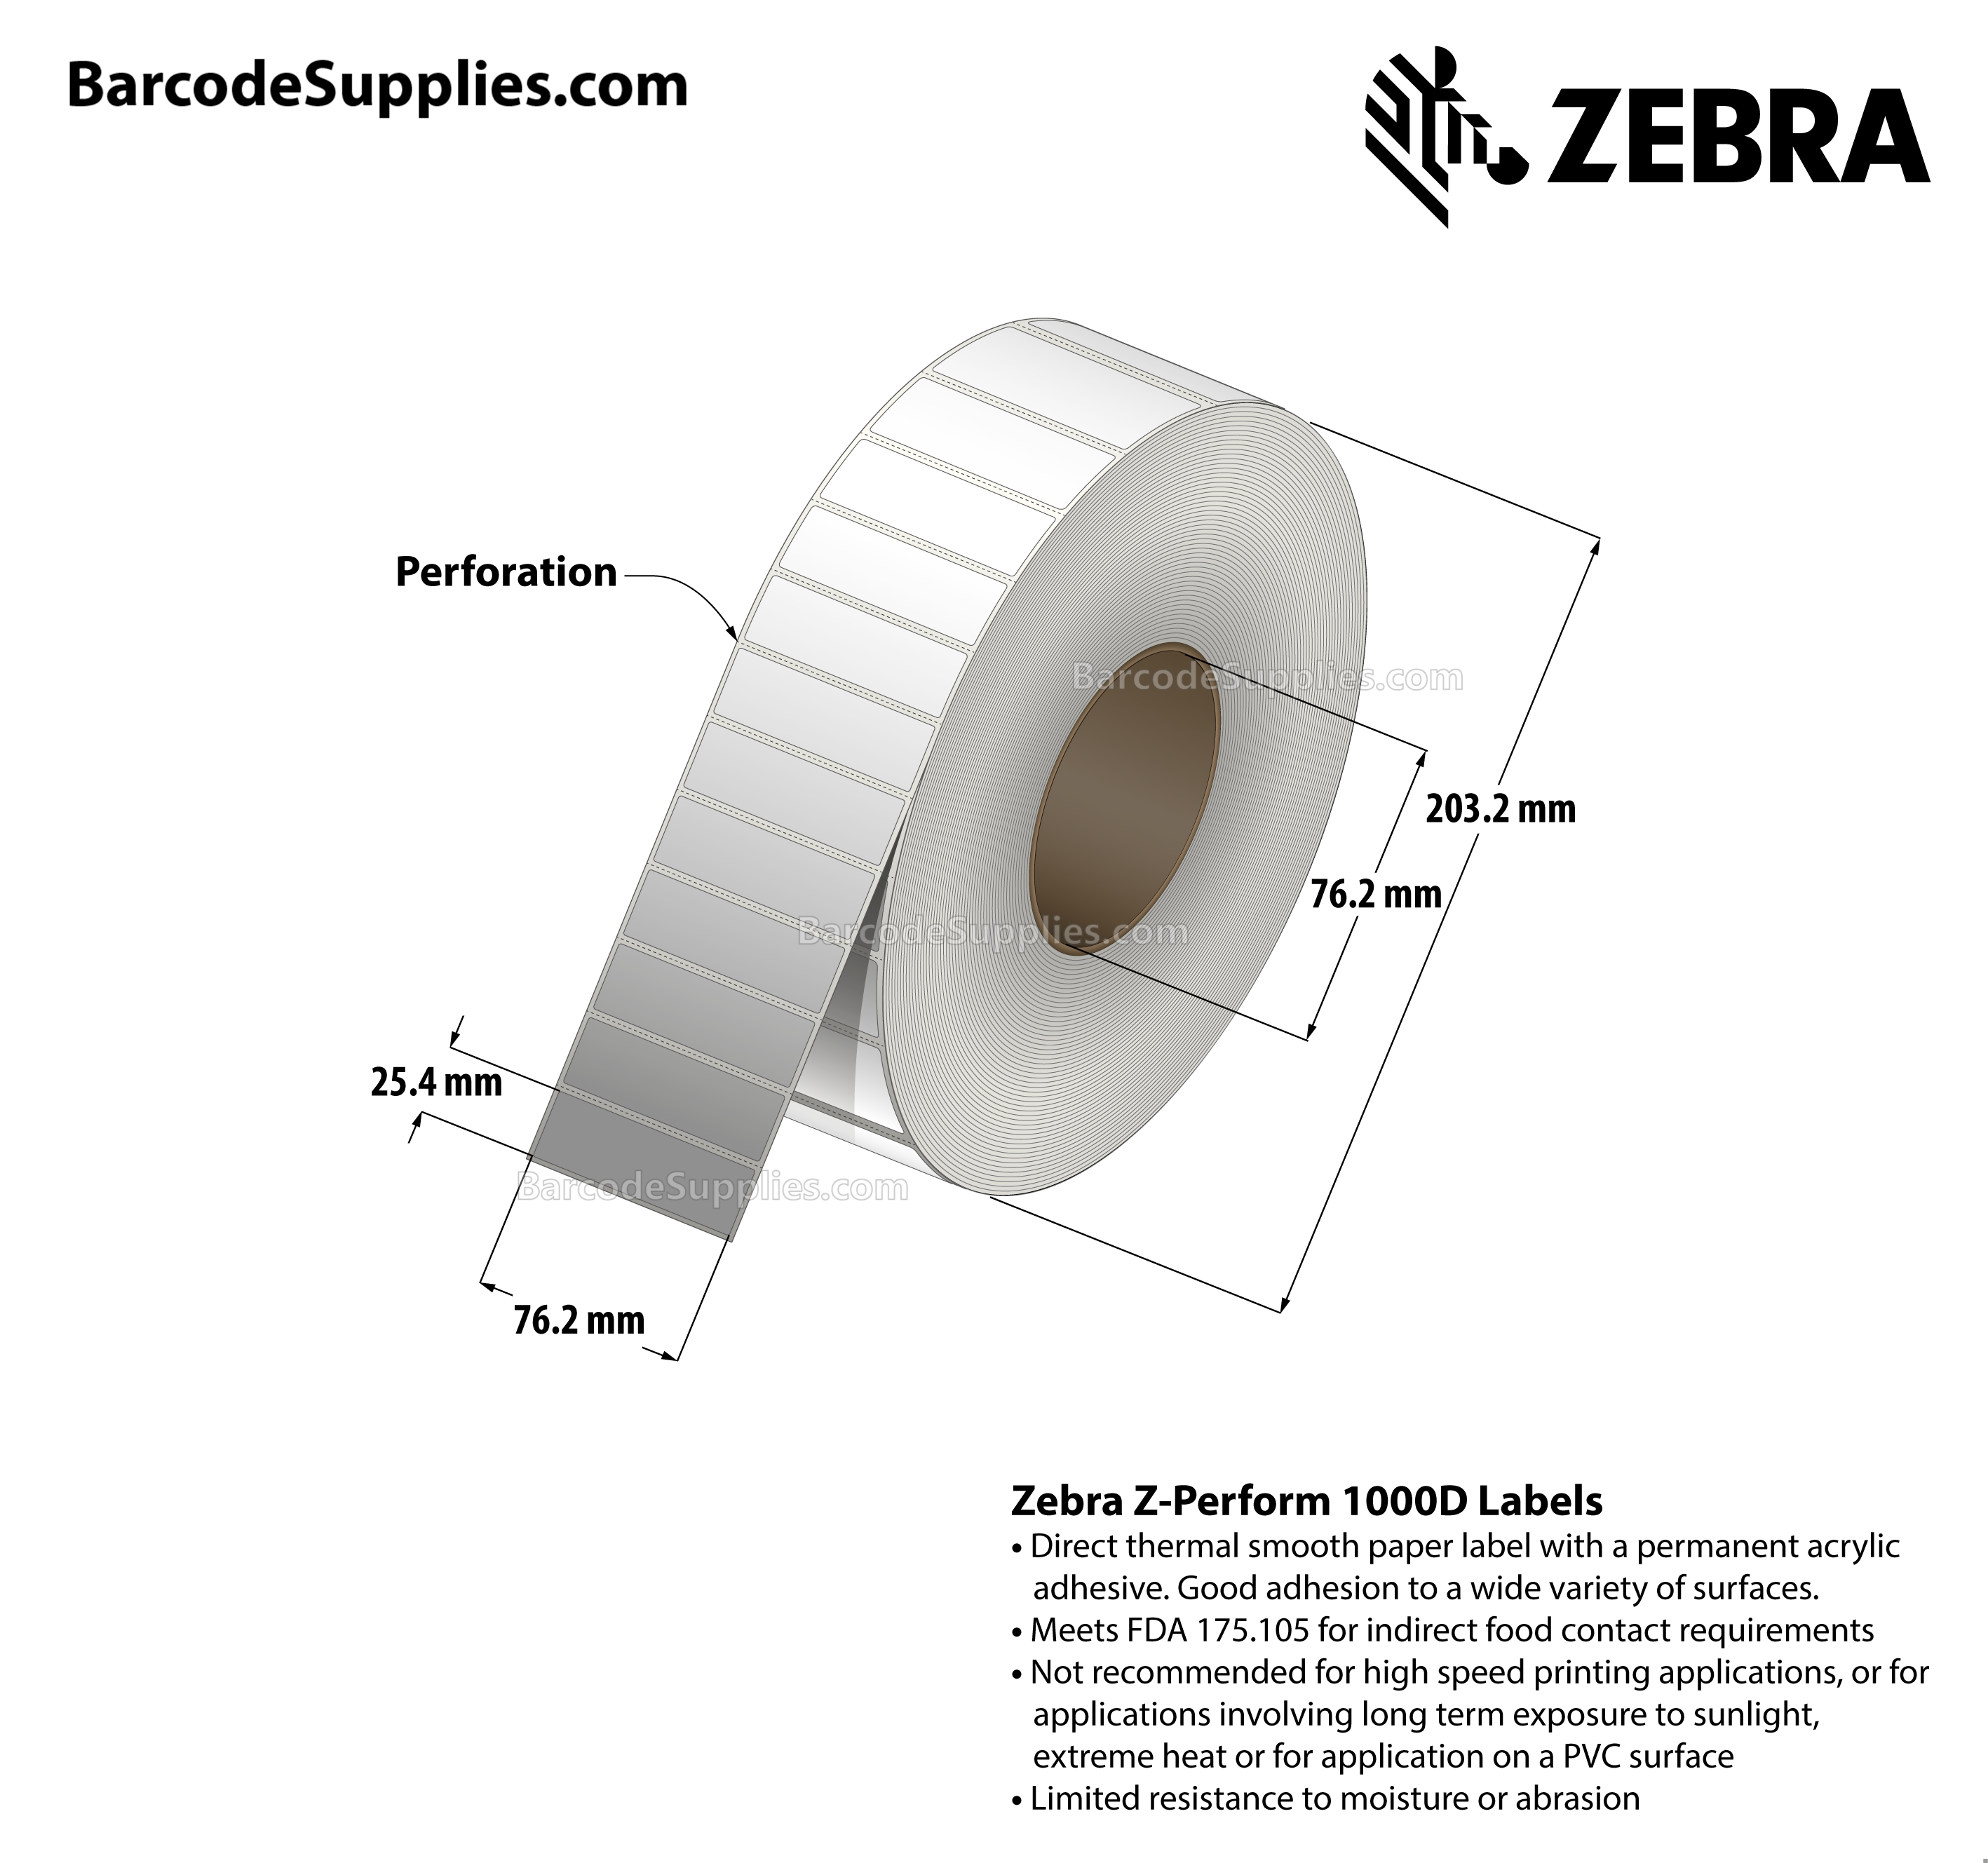 3 x 1 Direct Thermal White Z-Perform 1000D Labels With Permanent Adhesive - Perforated - 5500 Labels Per Roll - Carton Of 6 Rolls - 33000 Labels Total - MPN: 10000303